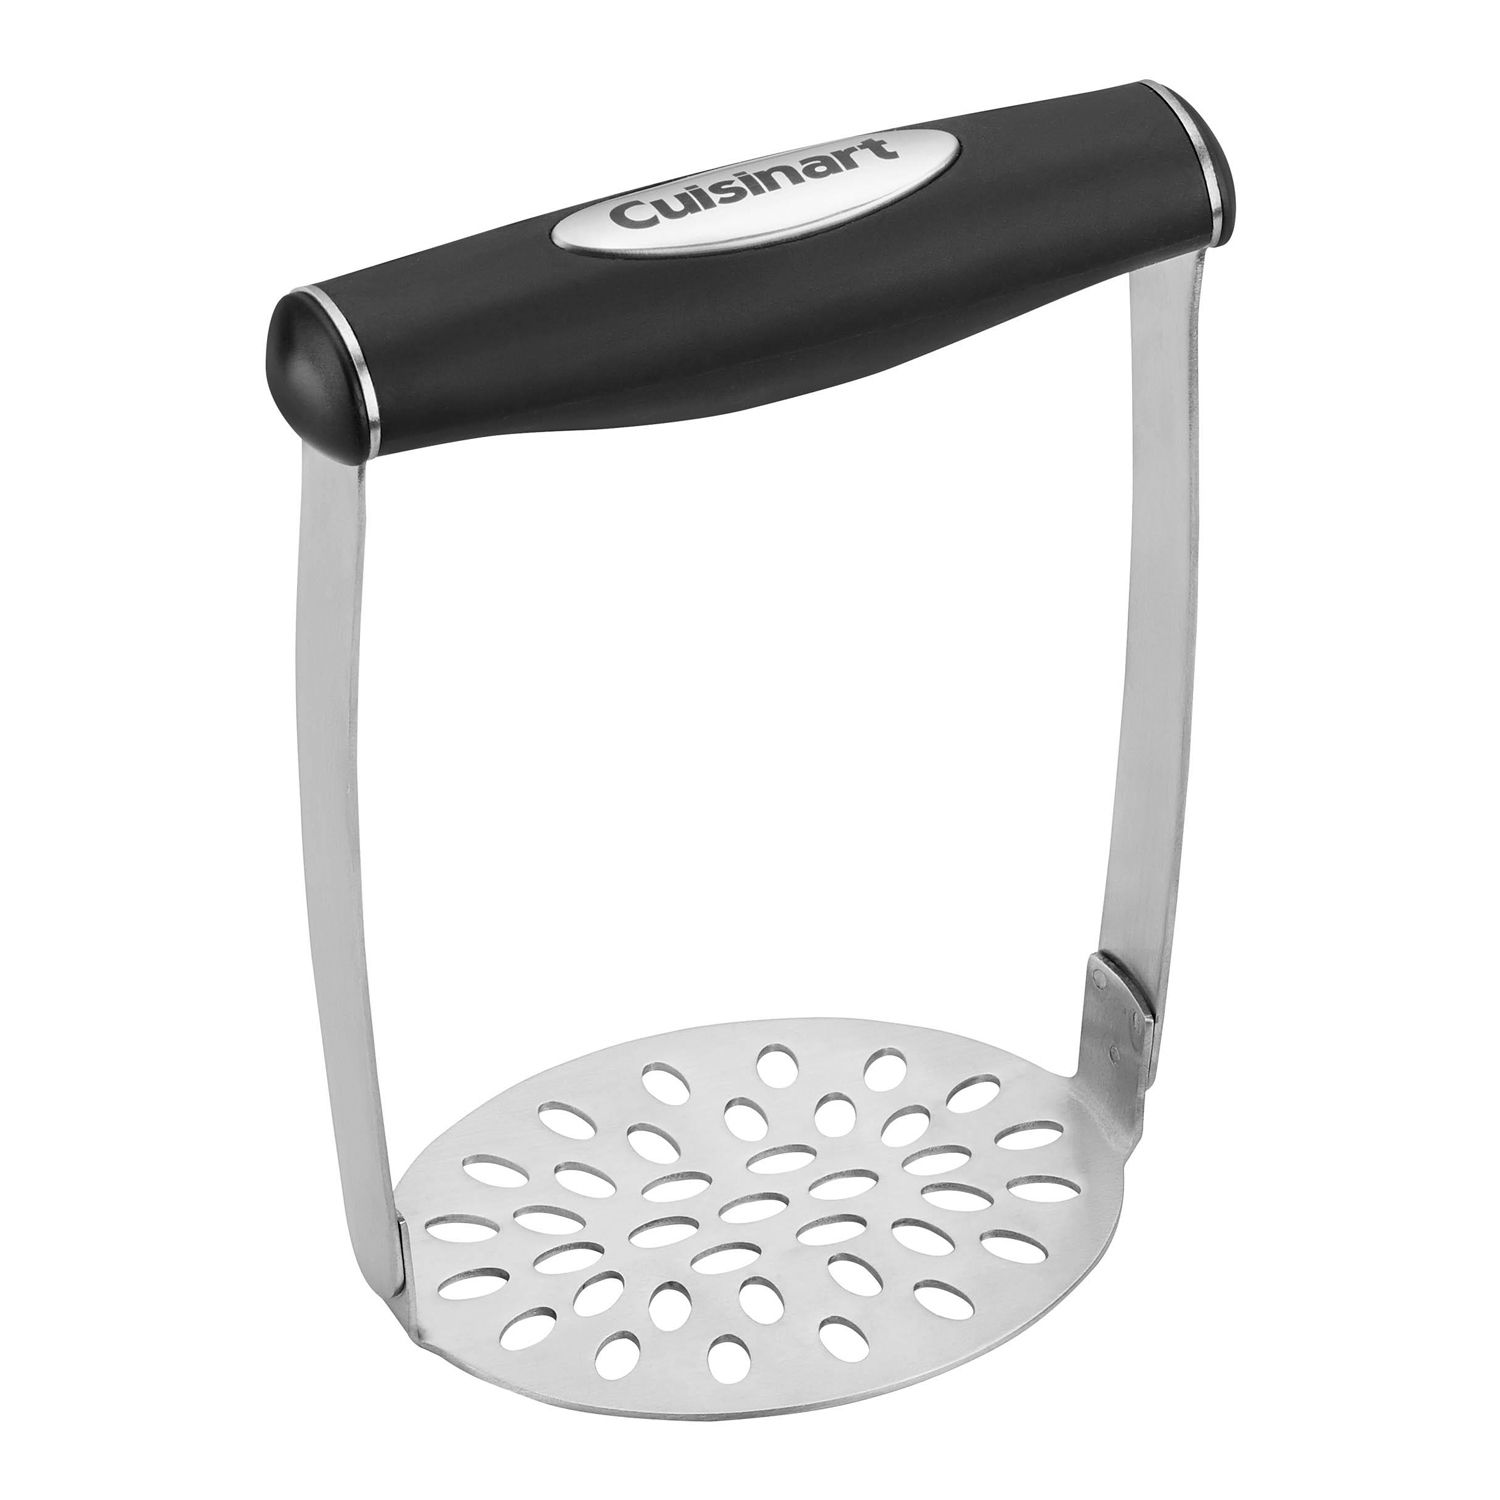 Oyster Silicone Potato Masher - The Peppermill